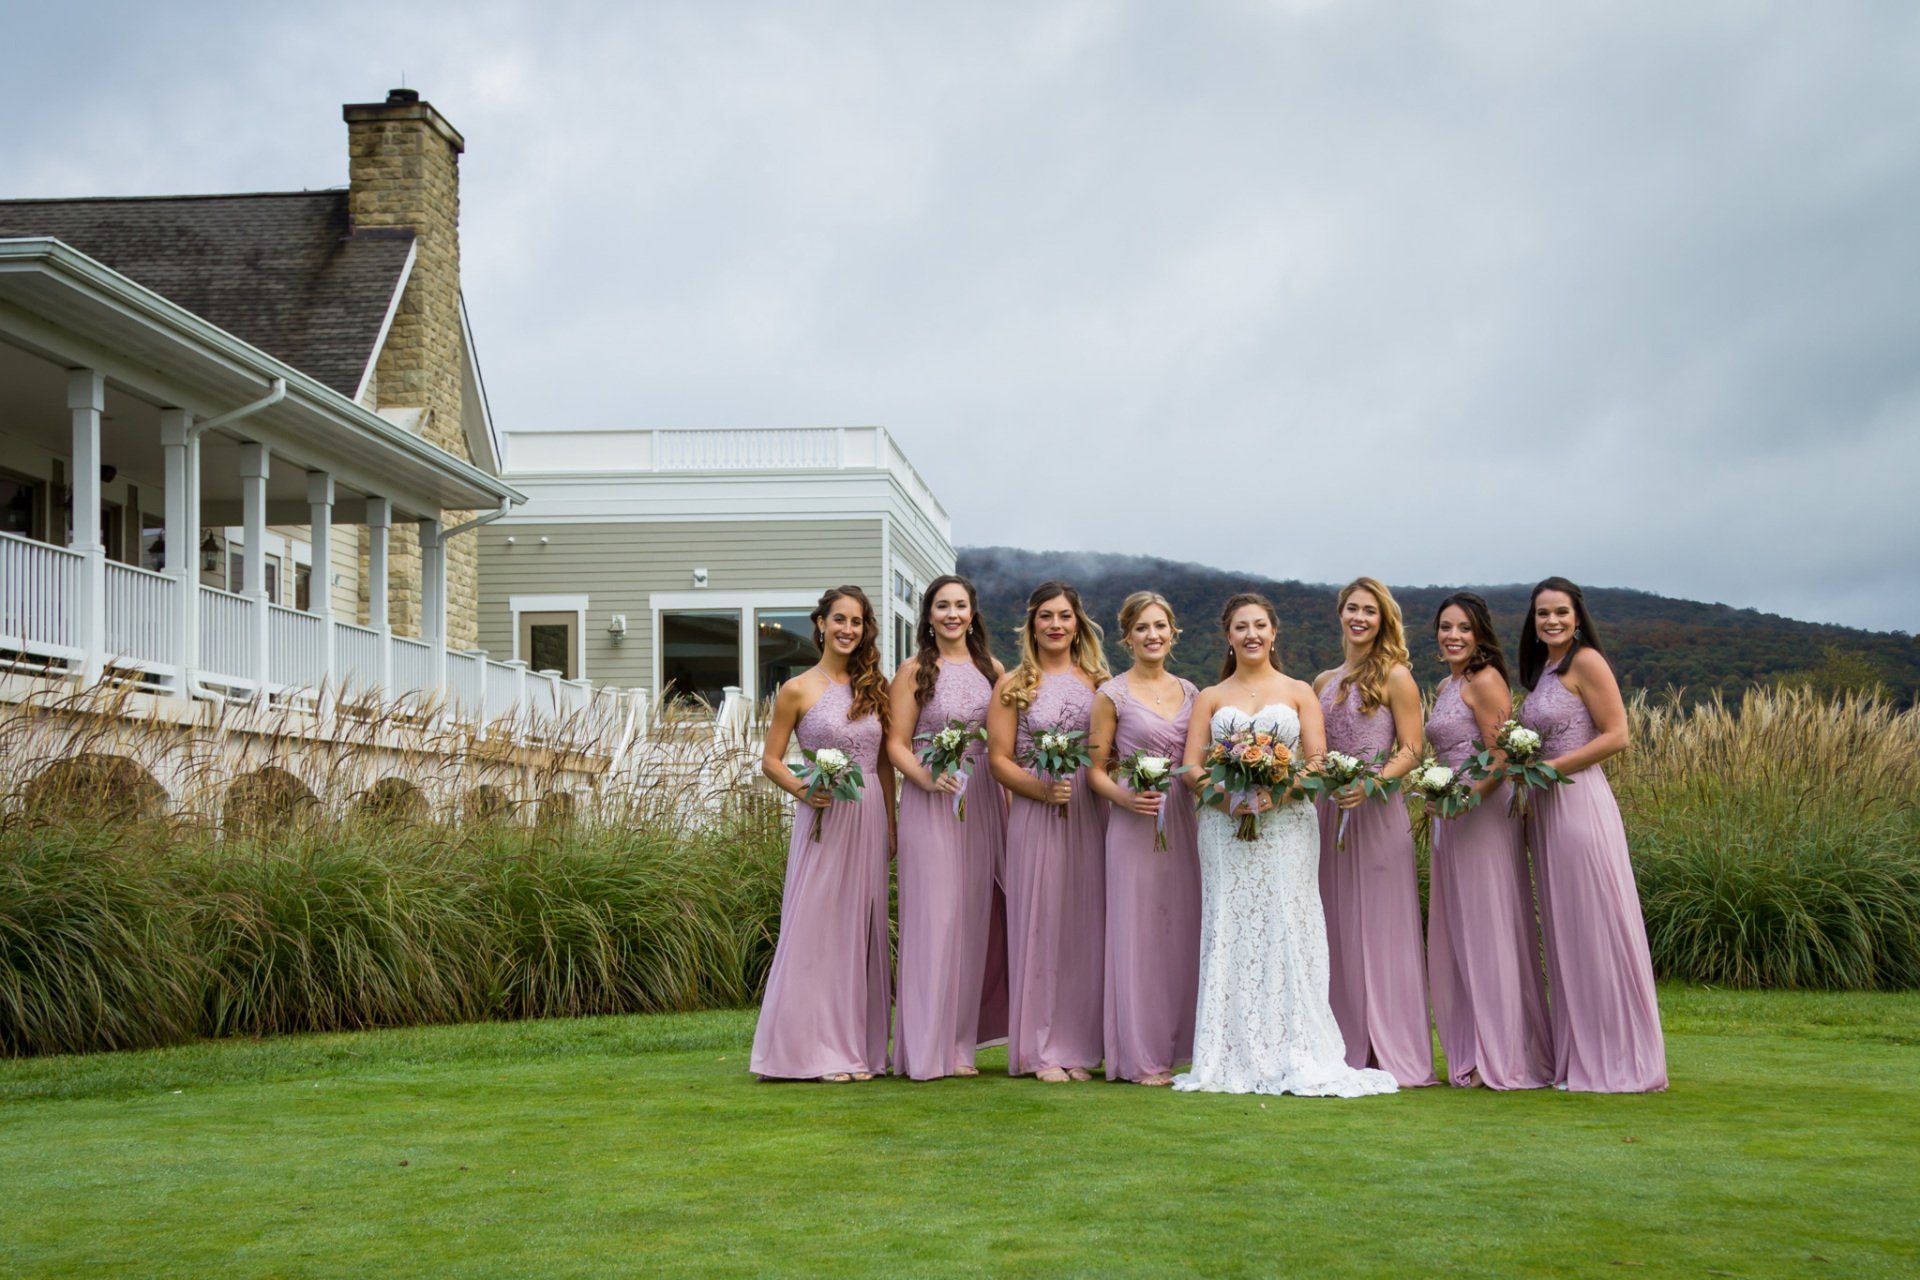 A group portrait of the bride and bridesmaids on a green lawn with mountains and the venue in the background